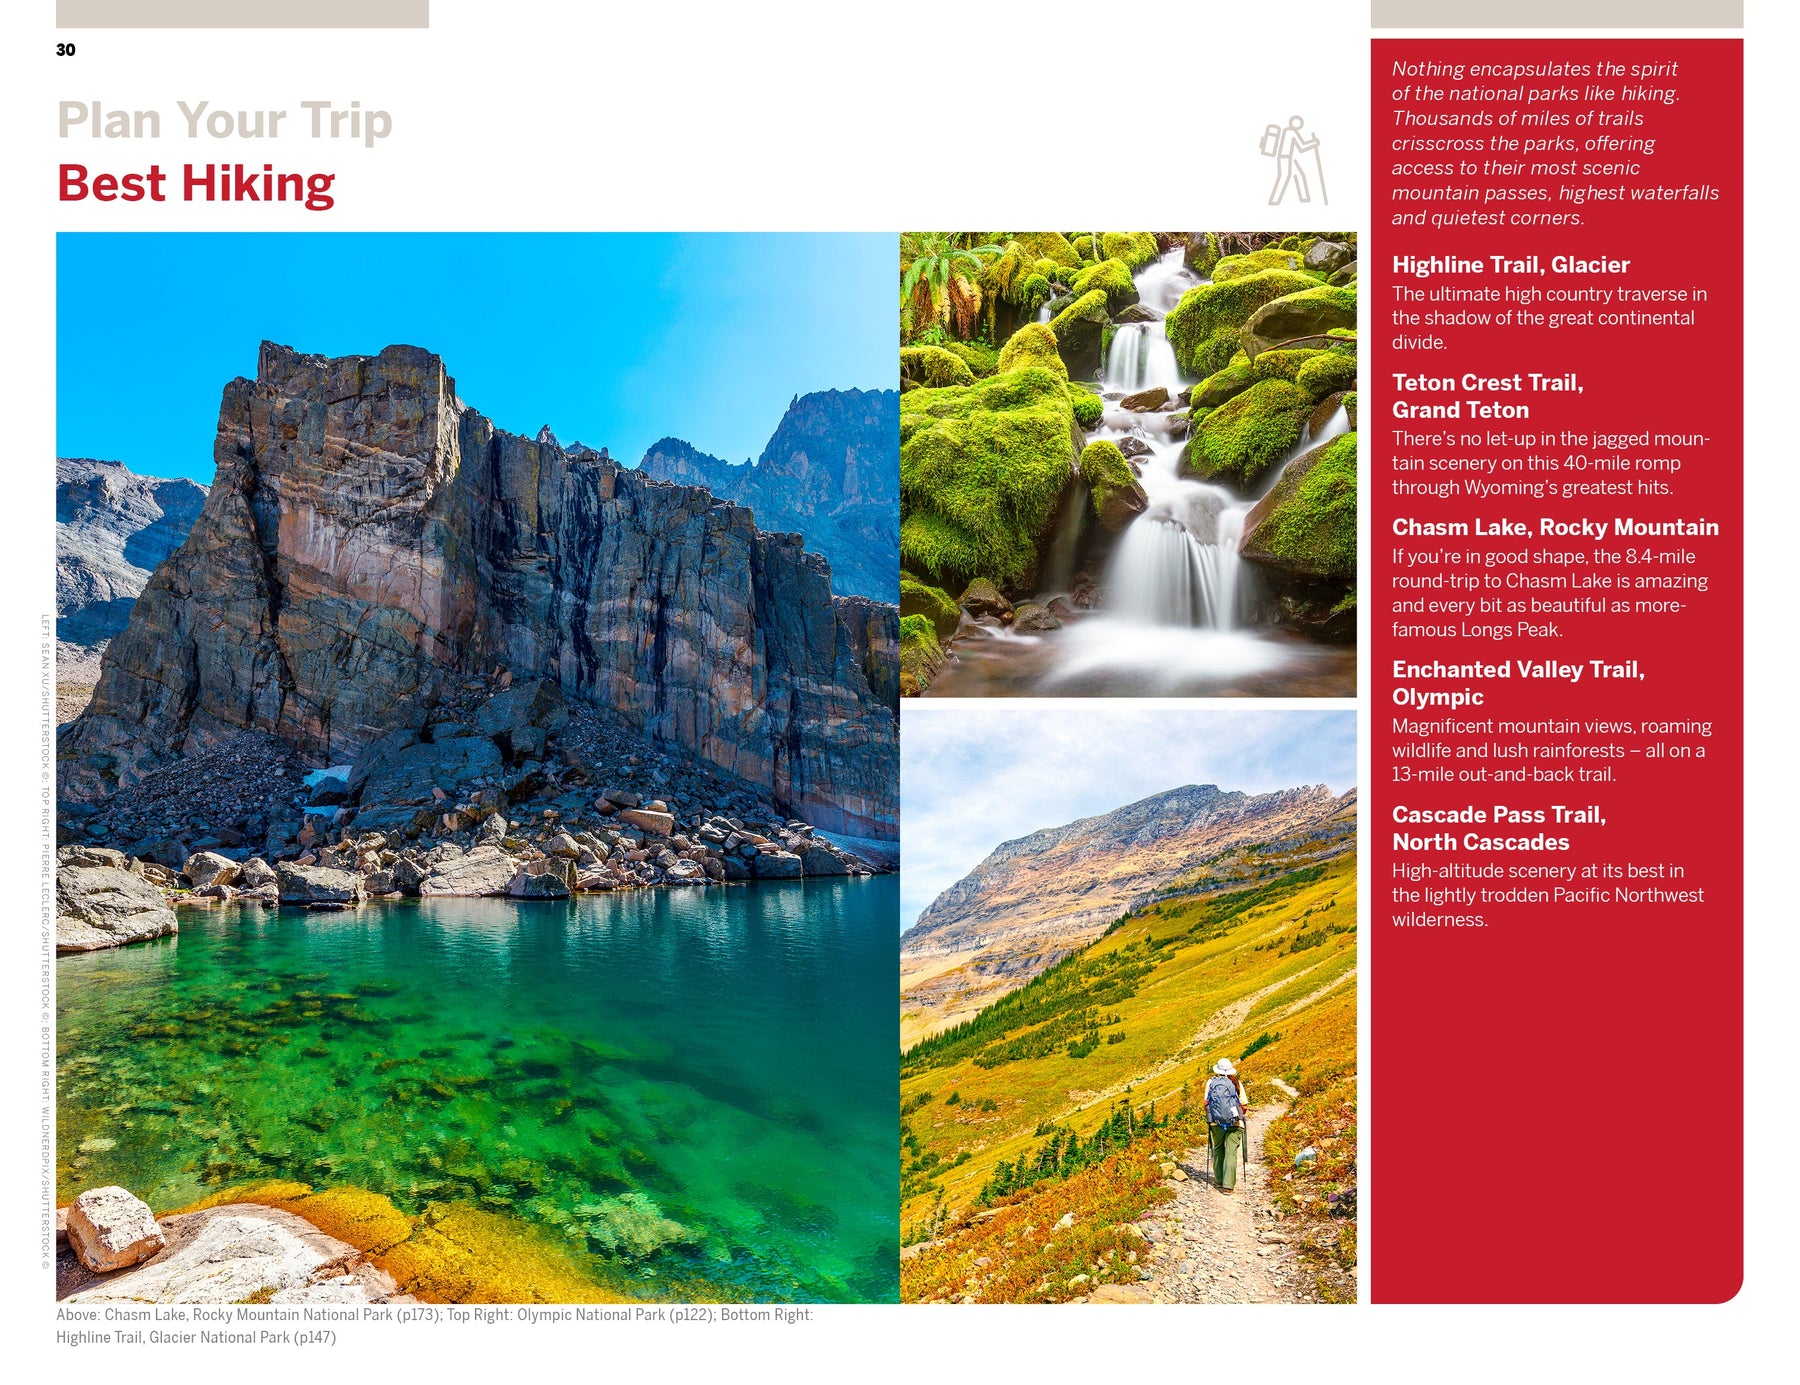 Rocky Mountains & Pacific Northwest's National Parks - Book